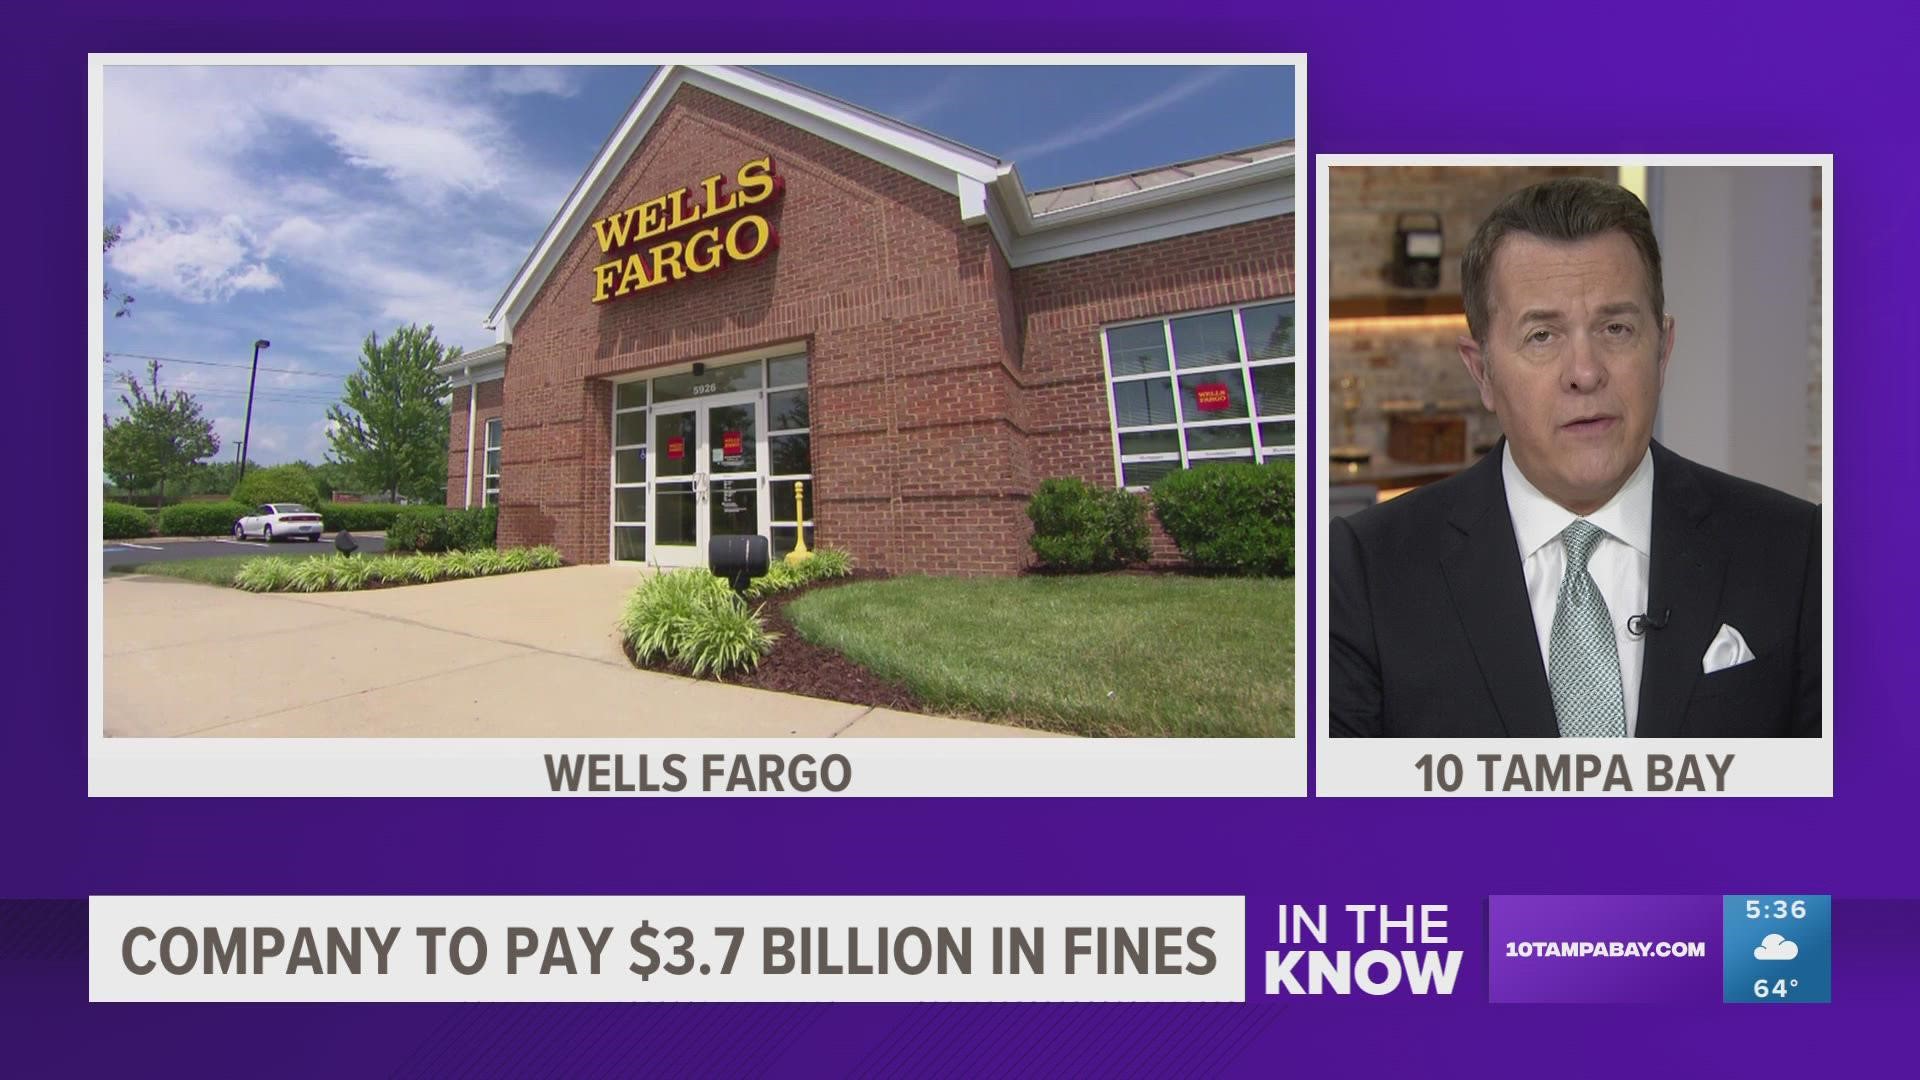 The amount is nearly quadruple the previous $1 billion penalty that Wells Fargo paid in 2018 to cover widespread consumer law violations.